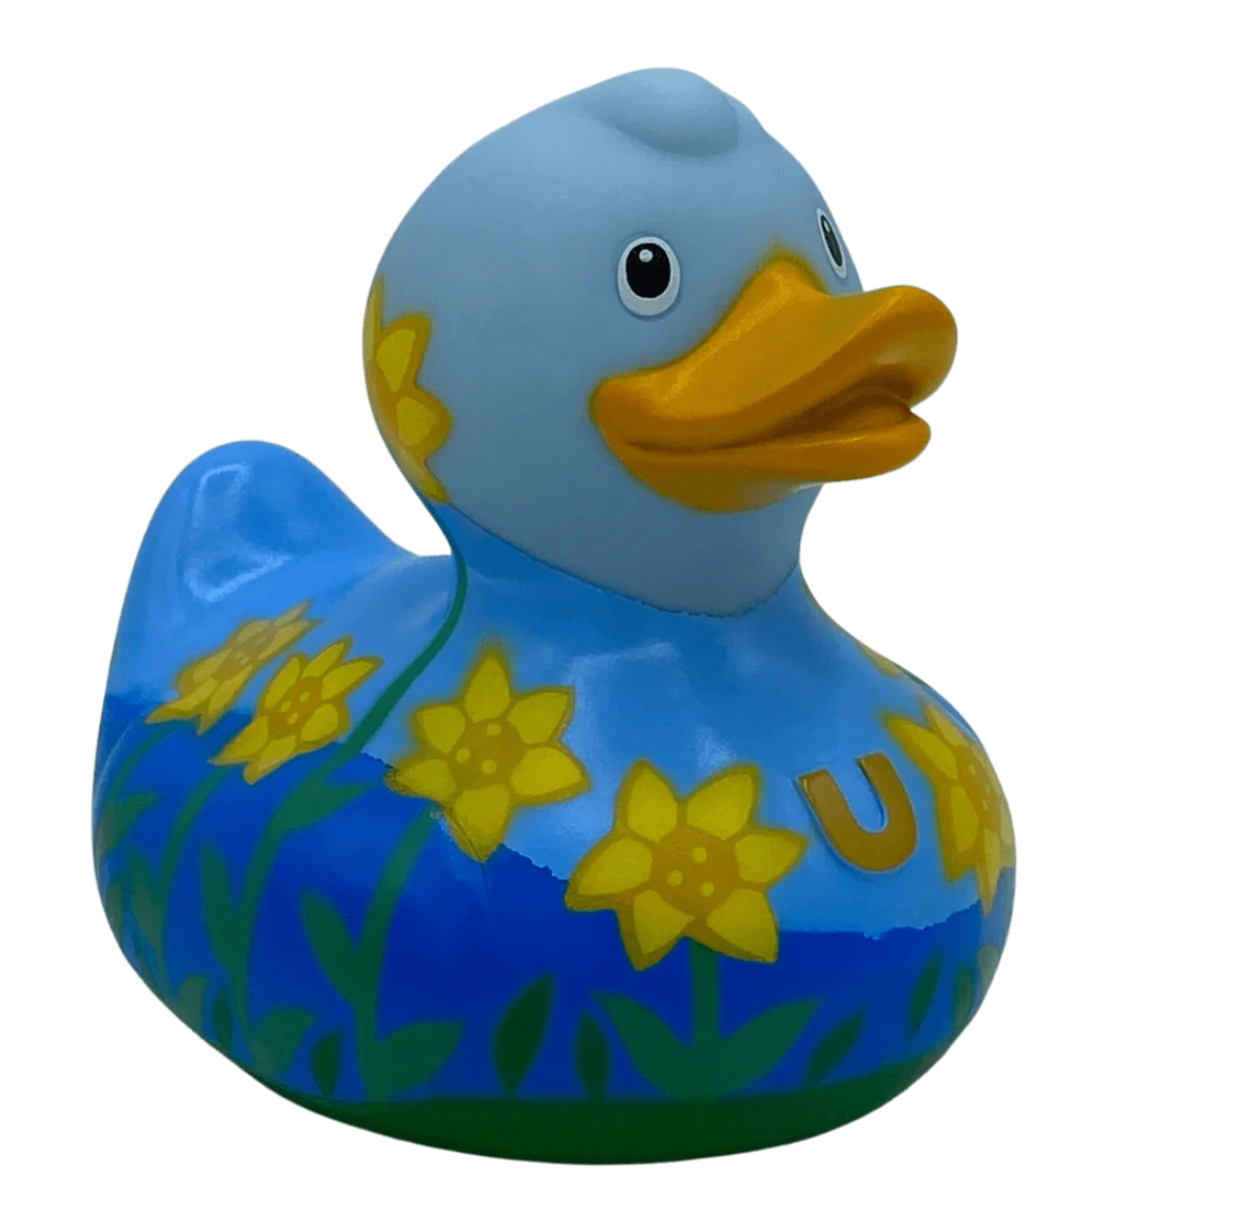 Daffodil Rubber Duck Limited Edition